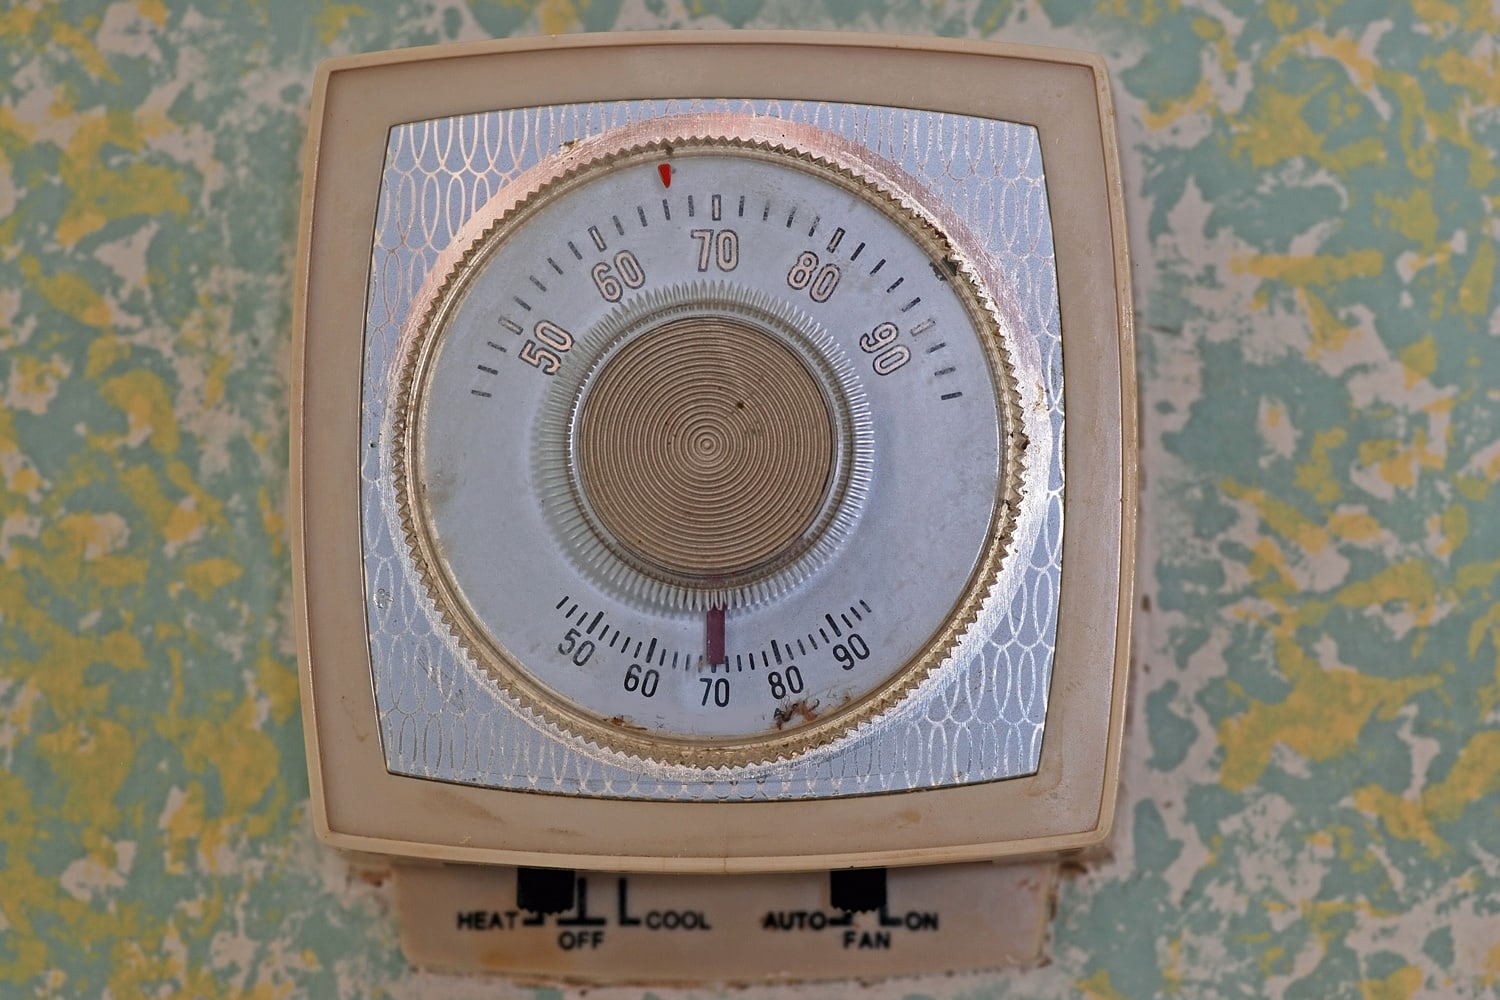 Old home temperature control unit on colorful wall -- dirty and grungy, indicating age - Thermostat Won't Go Above 70 - What To Do